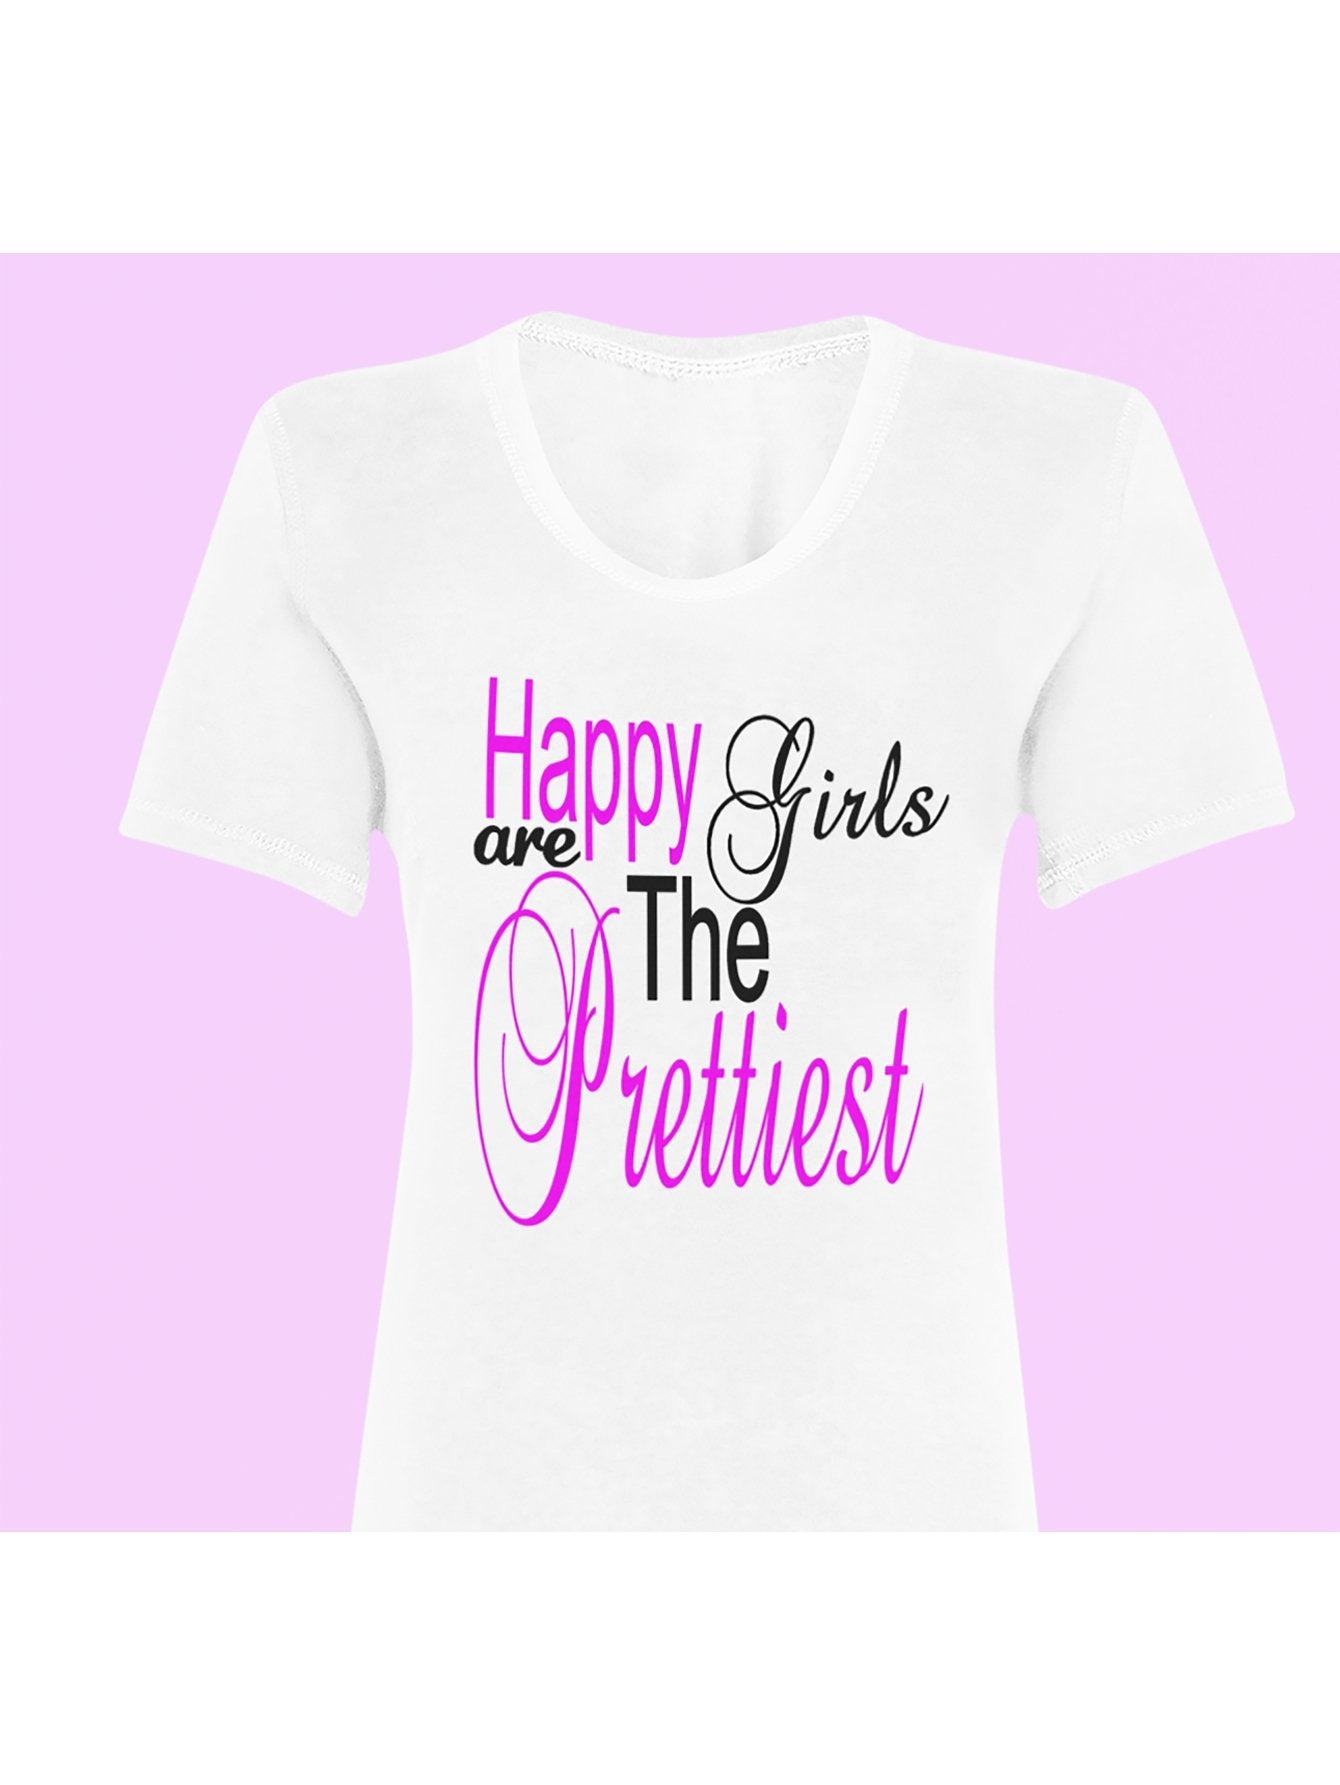 Happy Girl's Are The Prettiest - T-Shirt